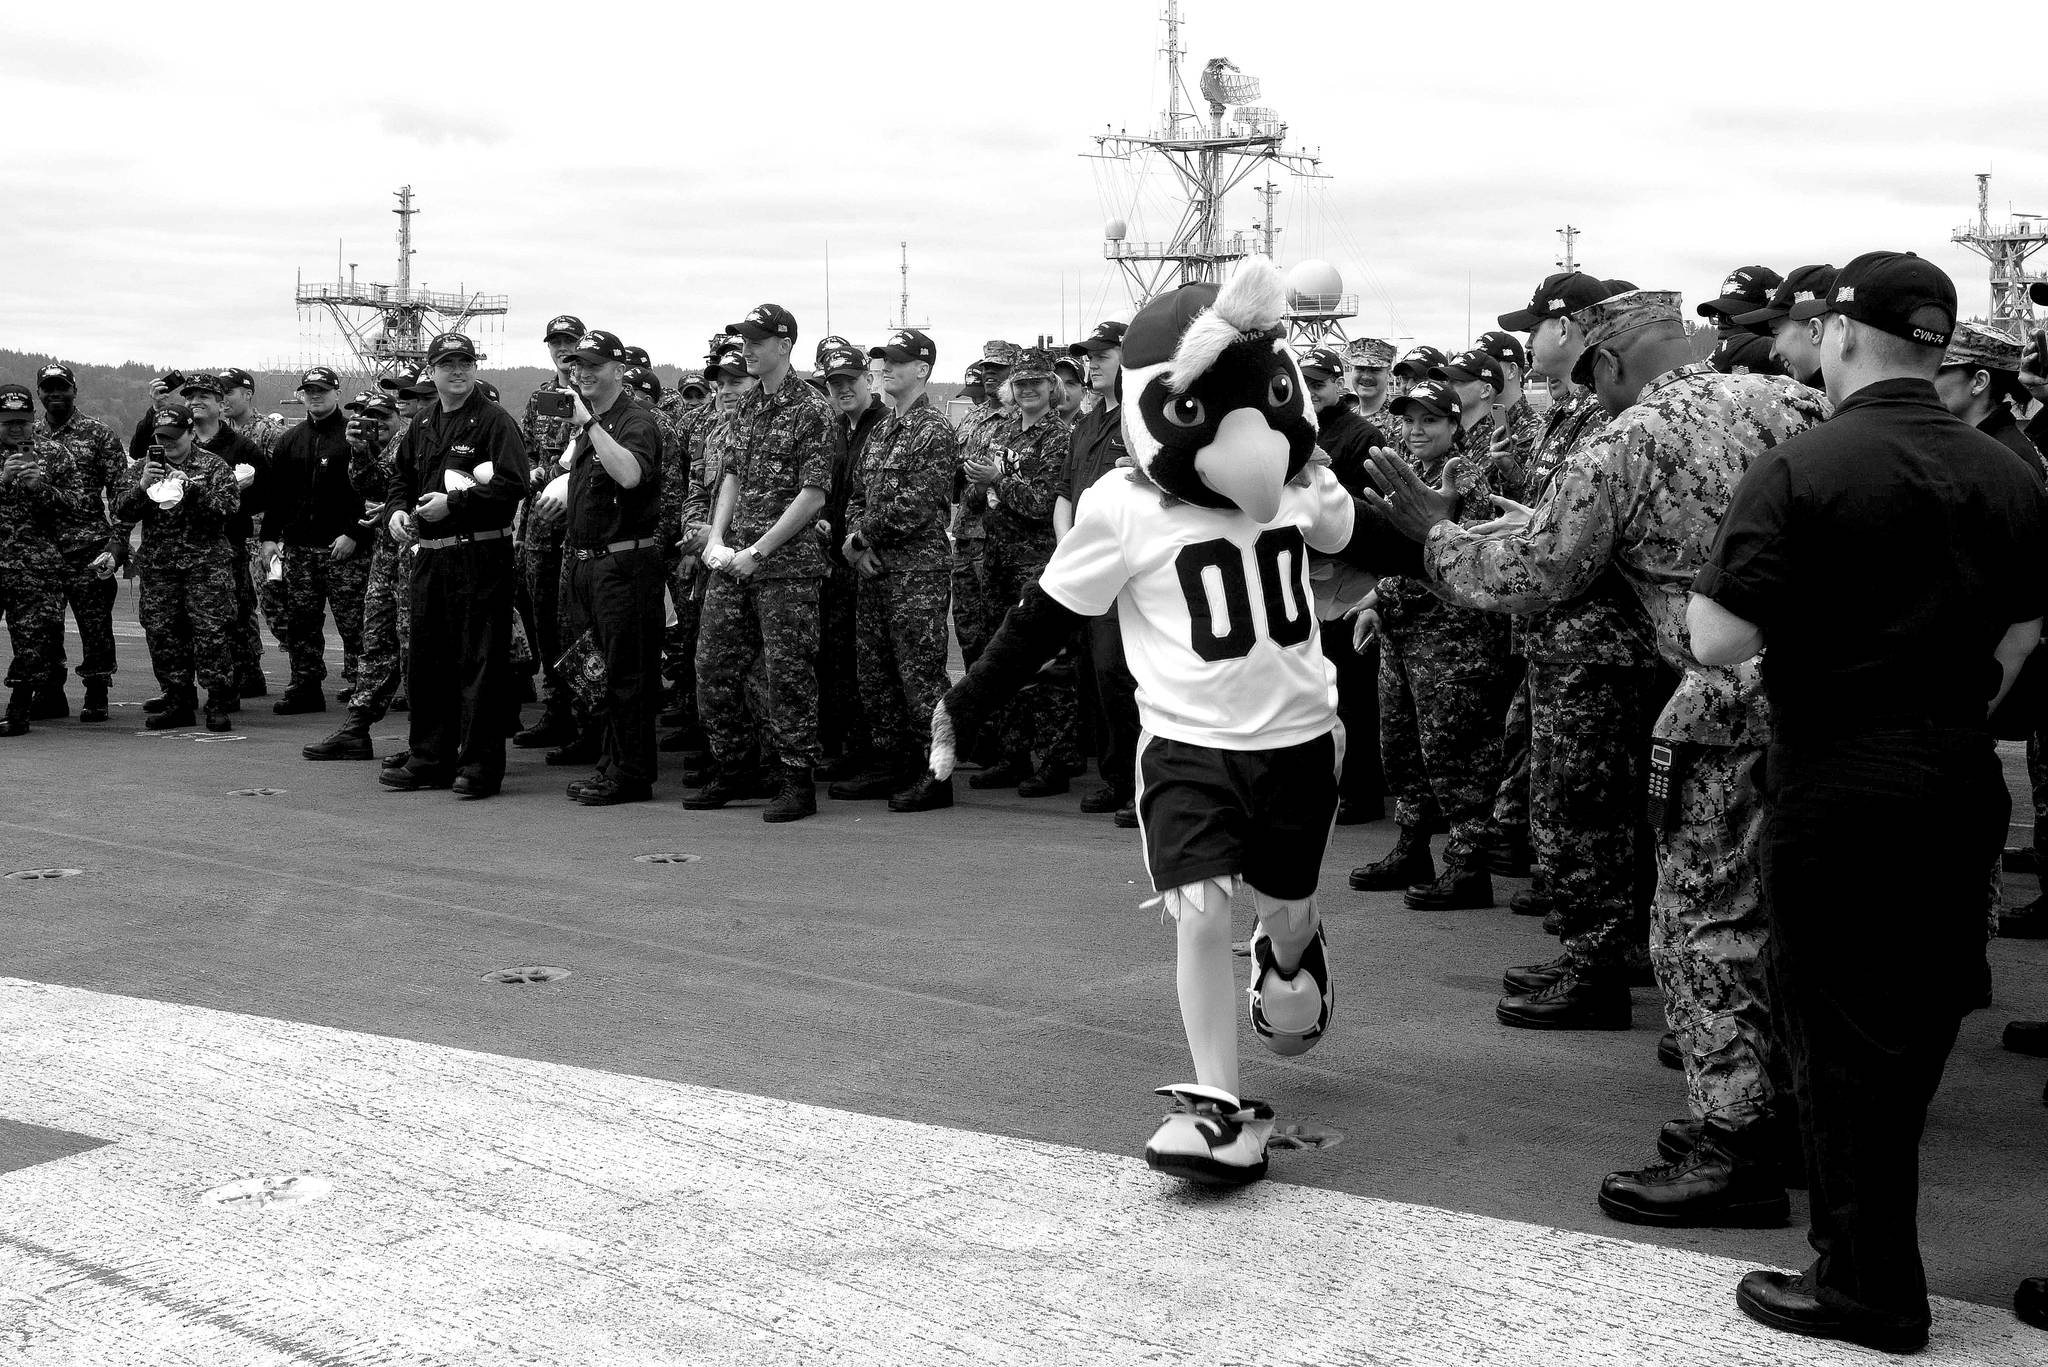 The Seattle Seahawks football team mascot, Boom, greets Sailors aboard the aircraft carrier USS John C. Stennis (CVN 74). Stennis is pier-side after returning to homeport after the completion of a seven-week underway where the ship’s crew completed TSTA/FEP early and Carrier Strike Group 3 Group Sail in preparation for its next scheduled deployment.                                Mass Communication Specialist Seaman Isabel Birchard / U.S. Navy